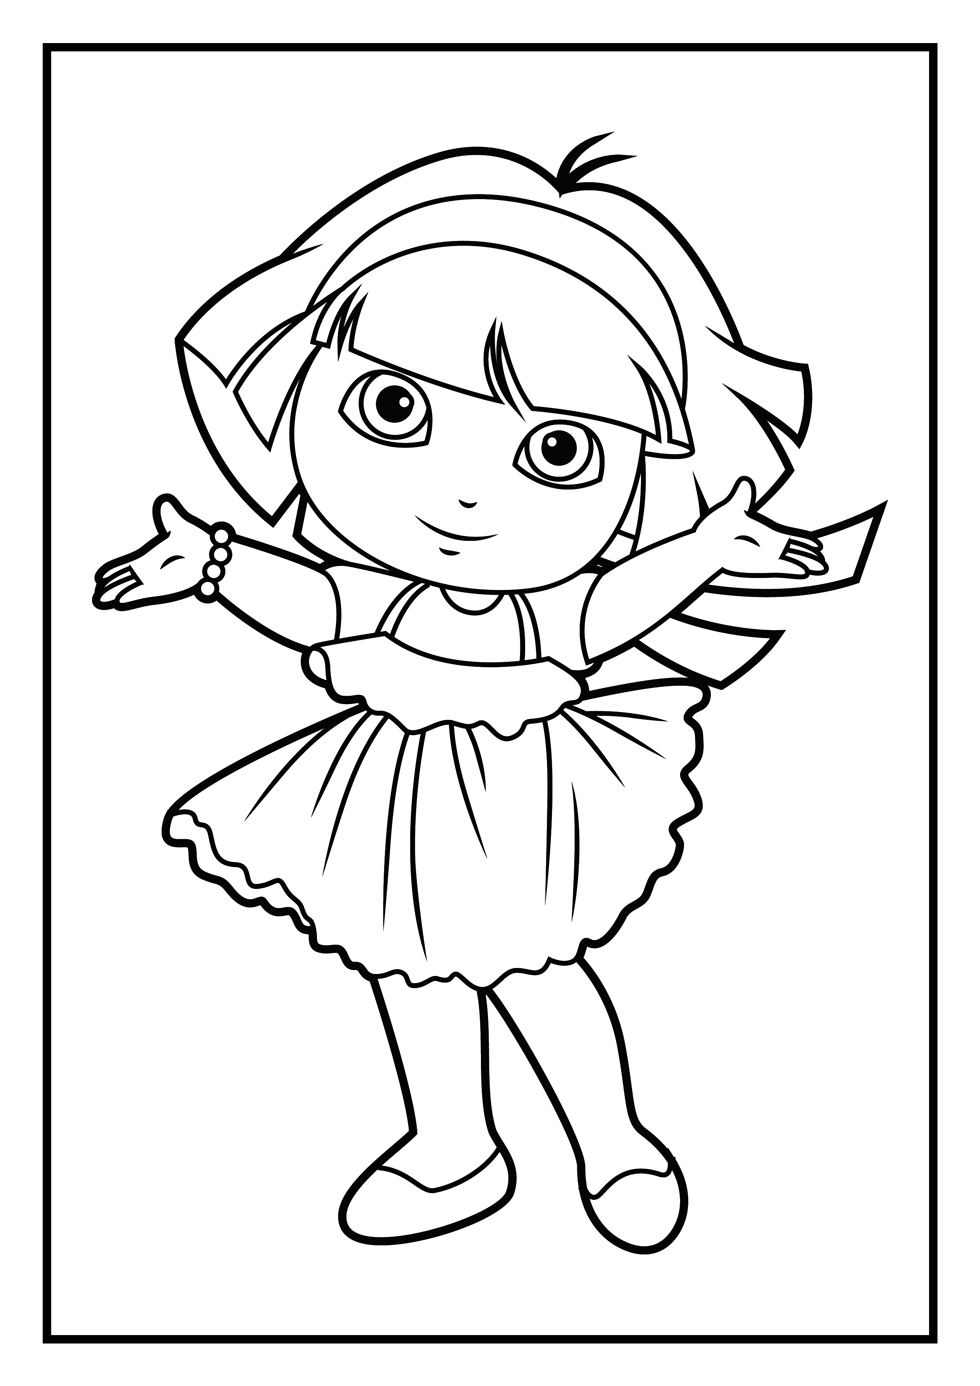 games of coloring pages - photo #42